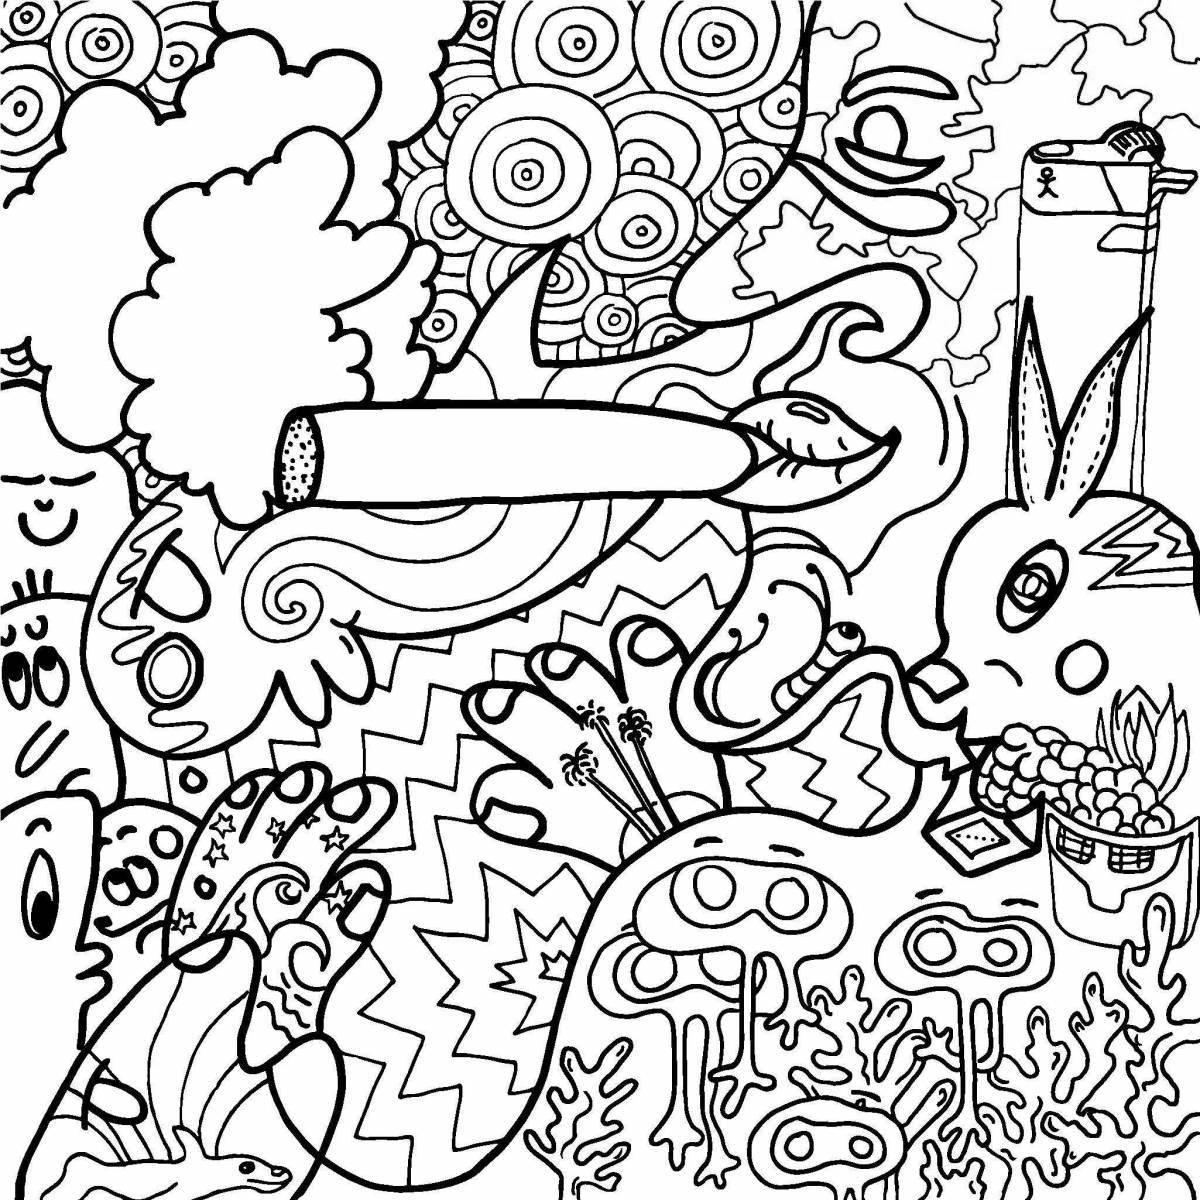 Hippie coloring book overloaded with color